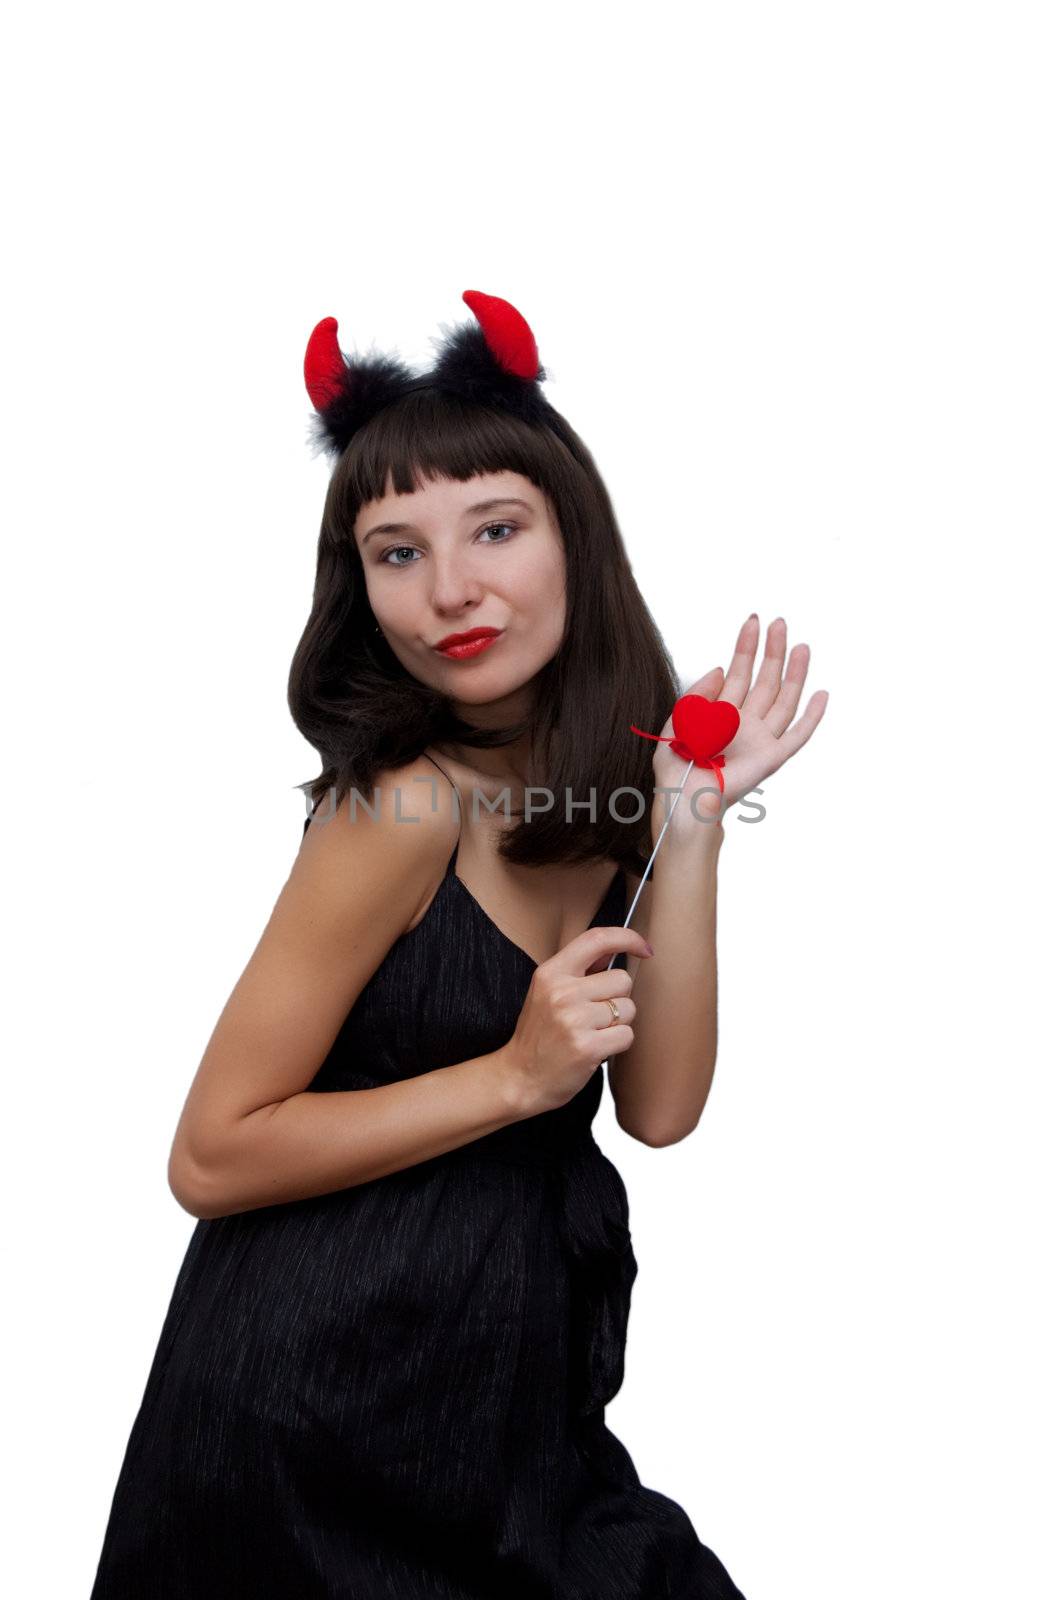 Devilish woman with horns and fabric heart over white